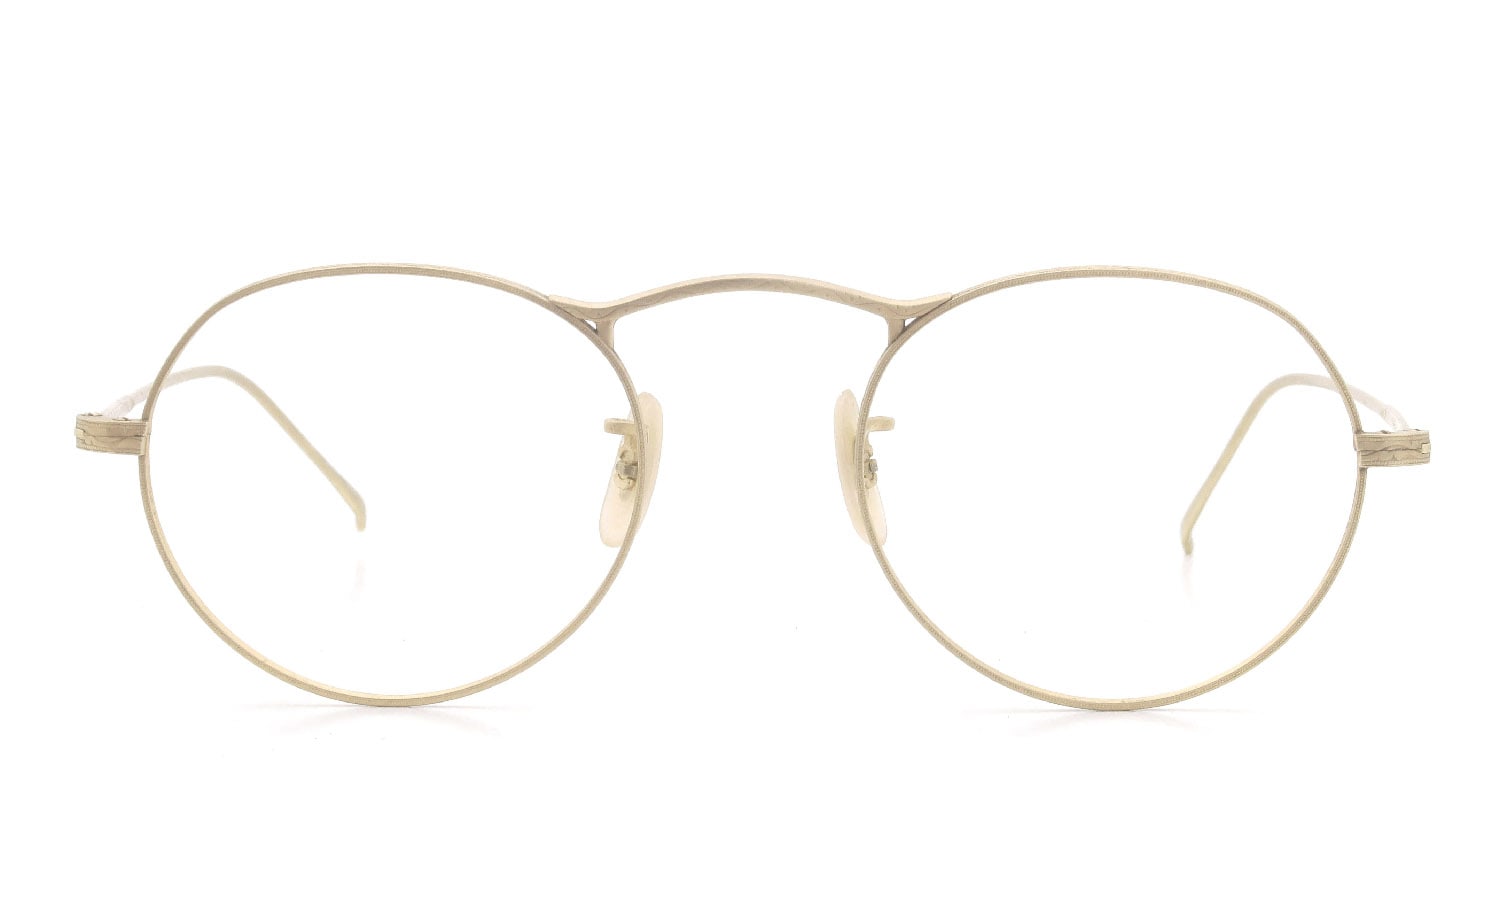 OLIVER PEOPLES archive メガネ通販 初期：M4 size G 生産